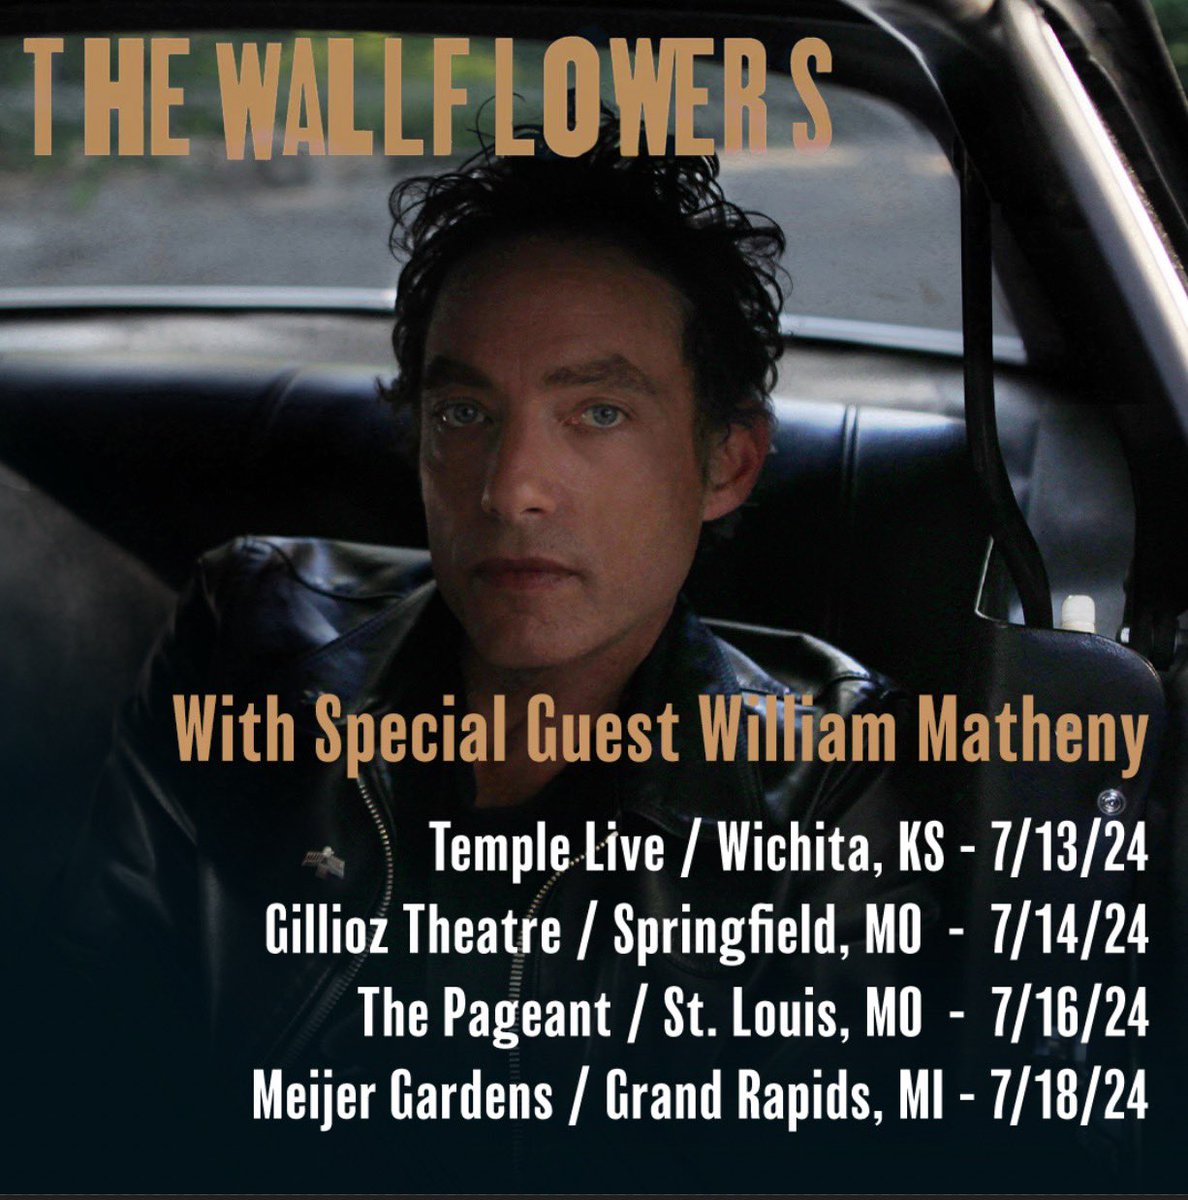 Excited to share that I’ll be opening a few more shows for @TheWallflowers in July. See you there if you’re gonna be there.

7/13 - @TempleLiveWich 
7/14 - @gillioztheatre 
7/16 - @ThePageantSTL 
7/18 - @MeijerGardens 

Tickets on sale at WilliamMatheny.com/tour